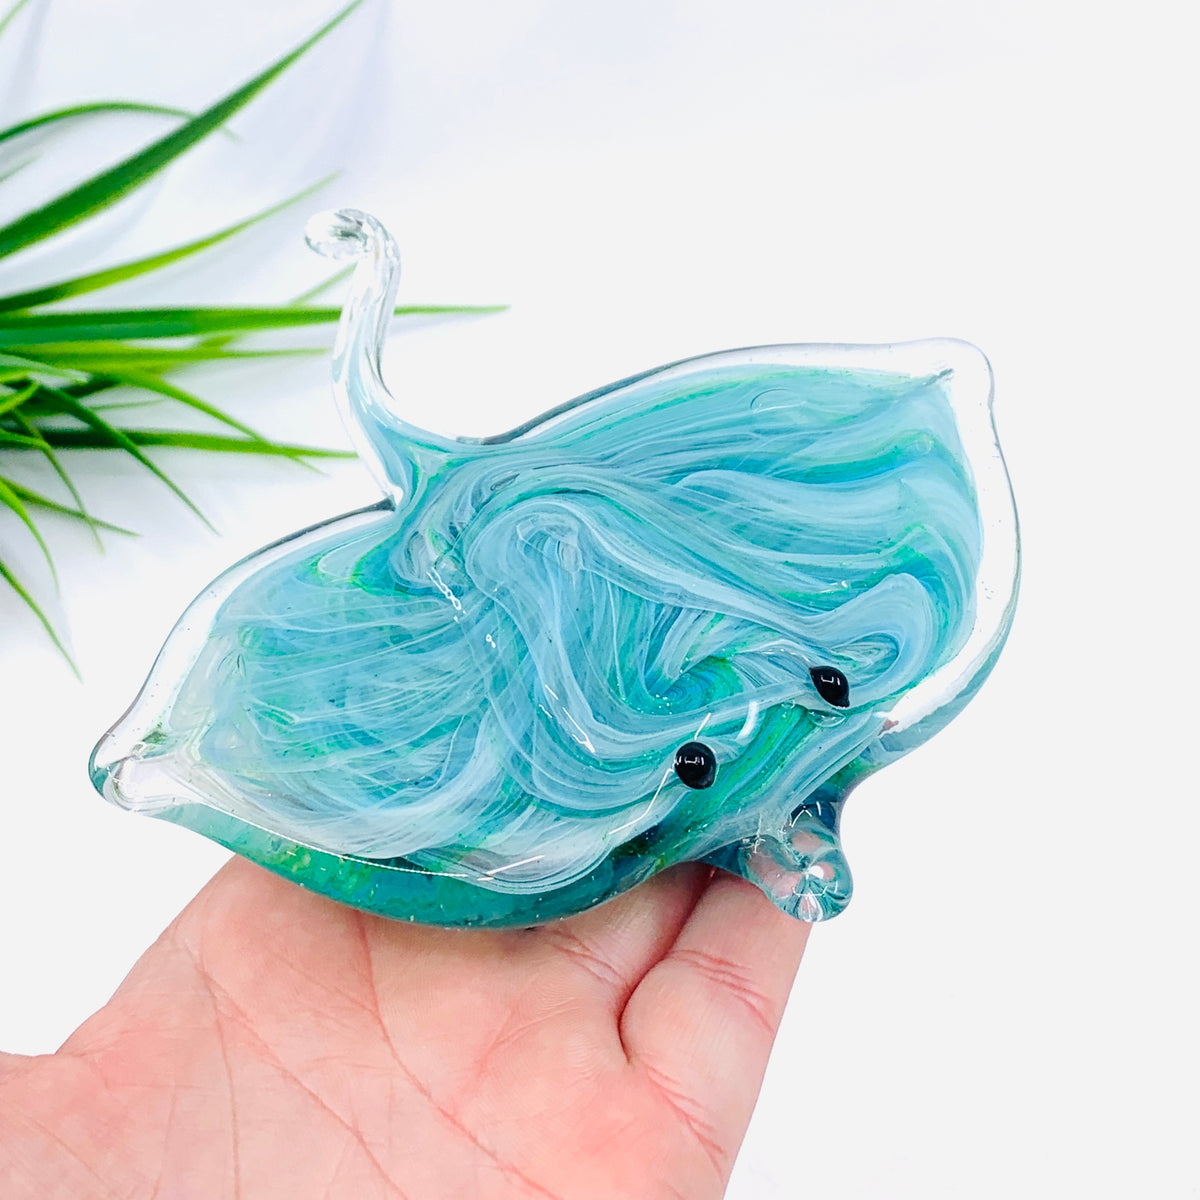 Glass Teal Stingray Paperweight